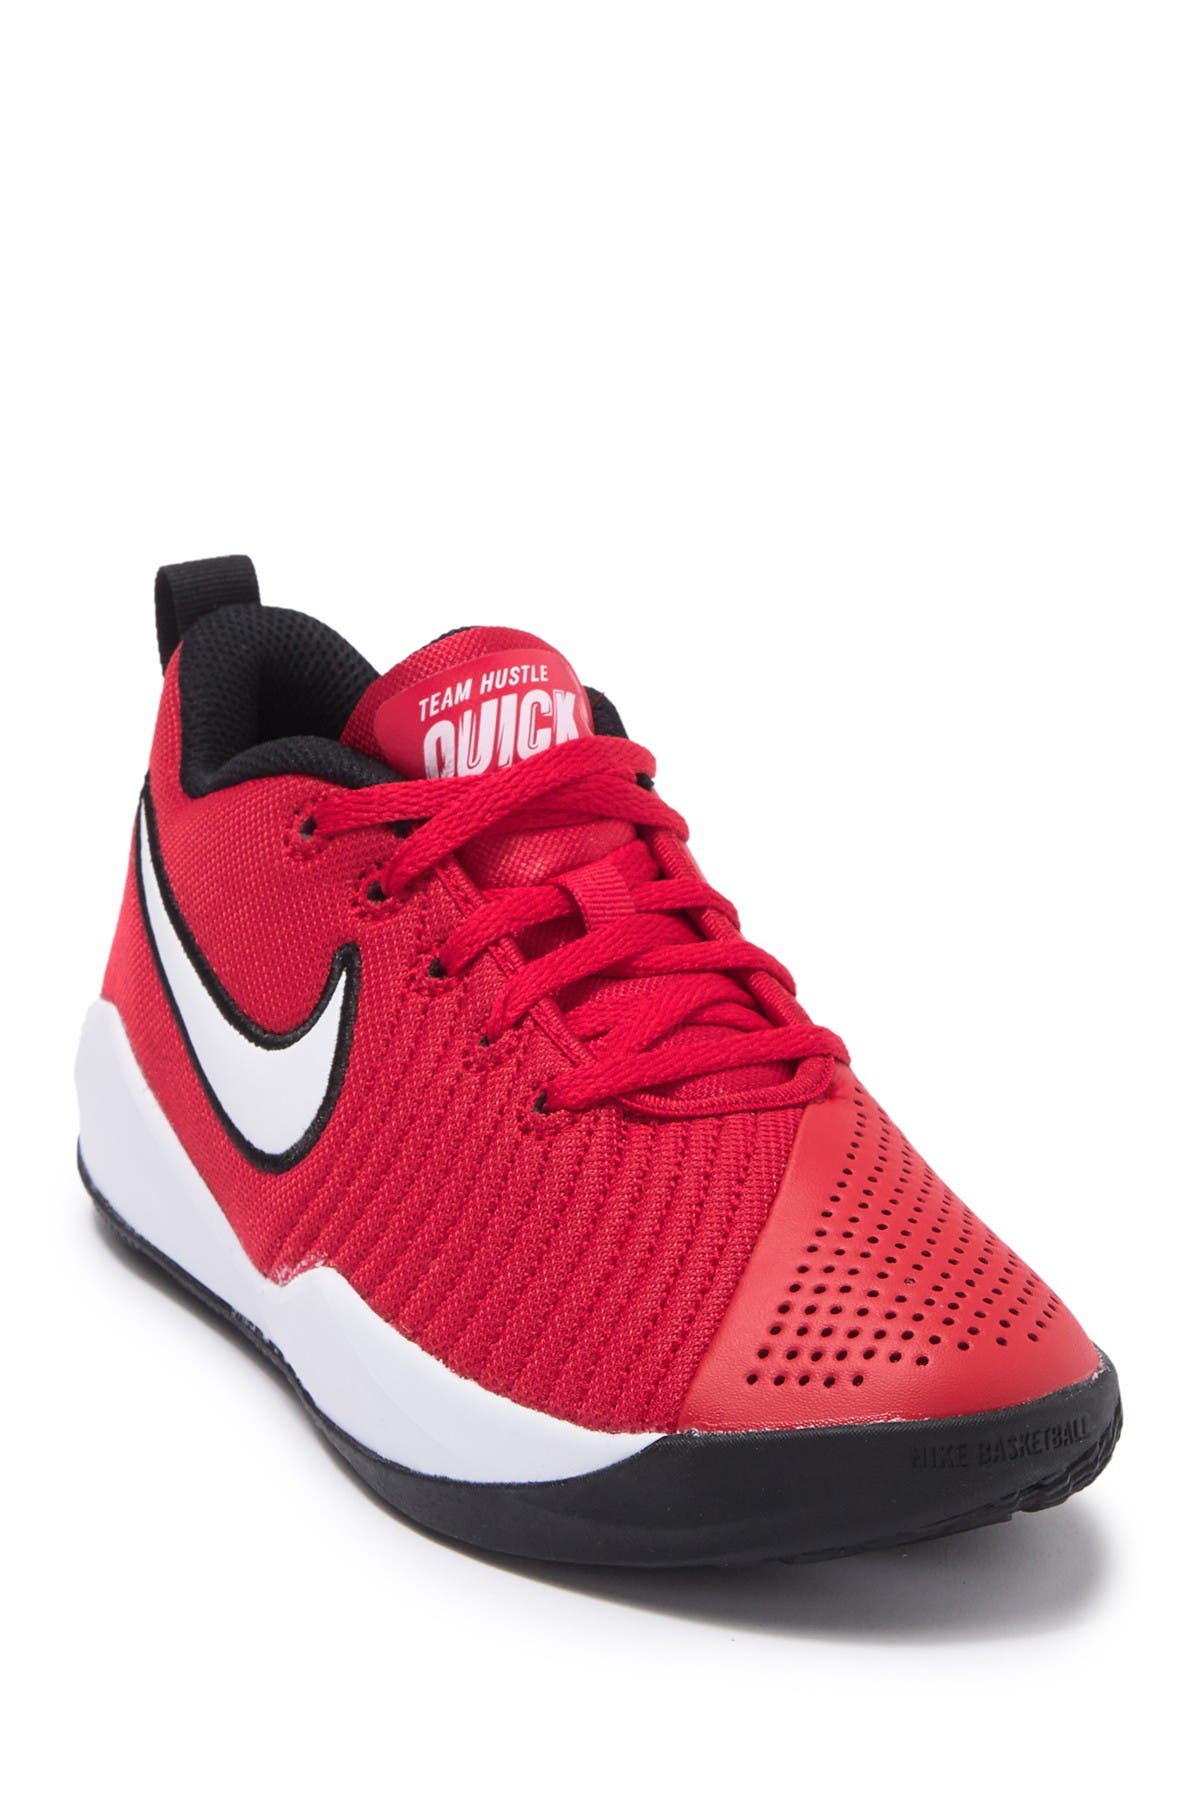 nike team hustle quick red